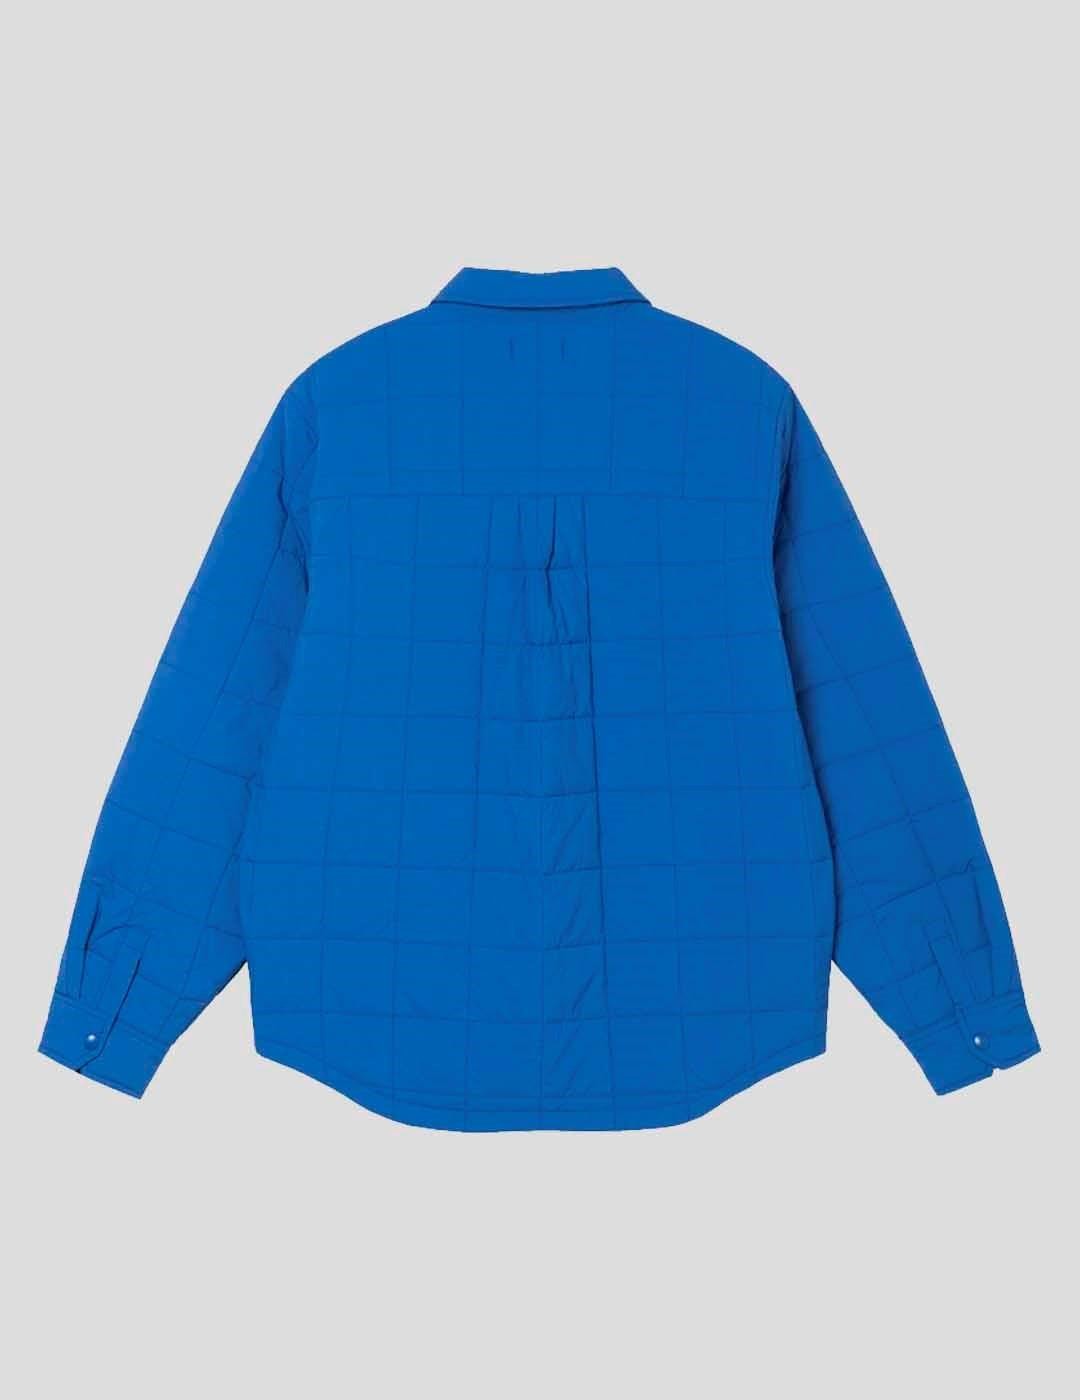 CHAQUETA STUSSY QUILTED FATIGUE SHIRT BLUE